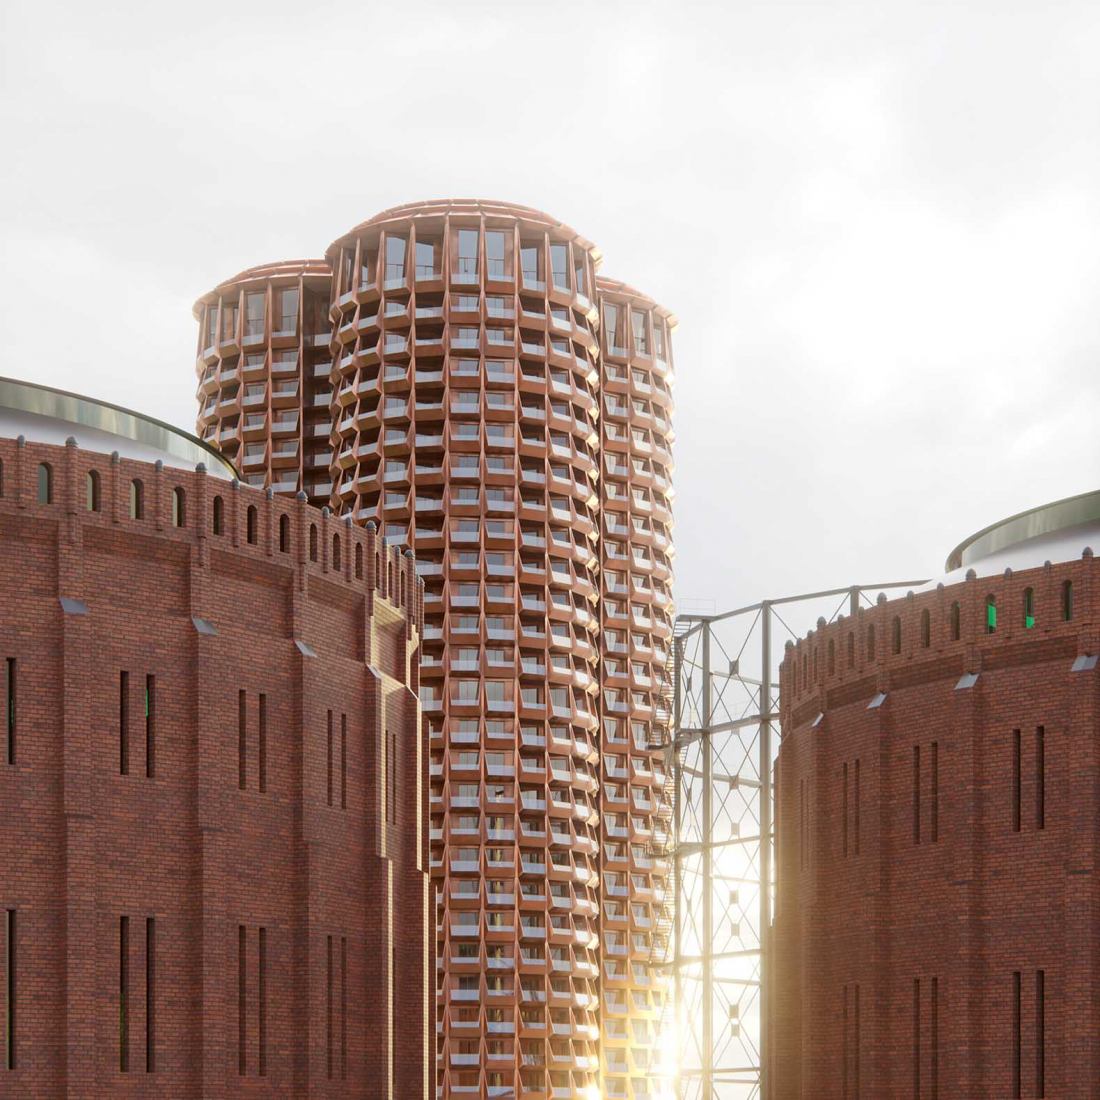 Residential tower at Stockholm’s historic gasworks by Cobe and Yellon. Rendering by Cobe and Yellon